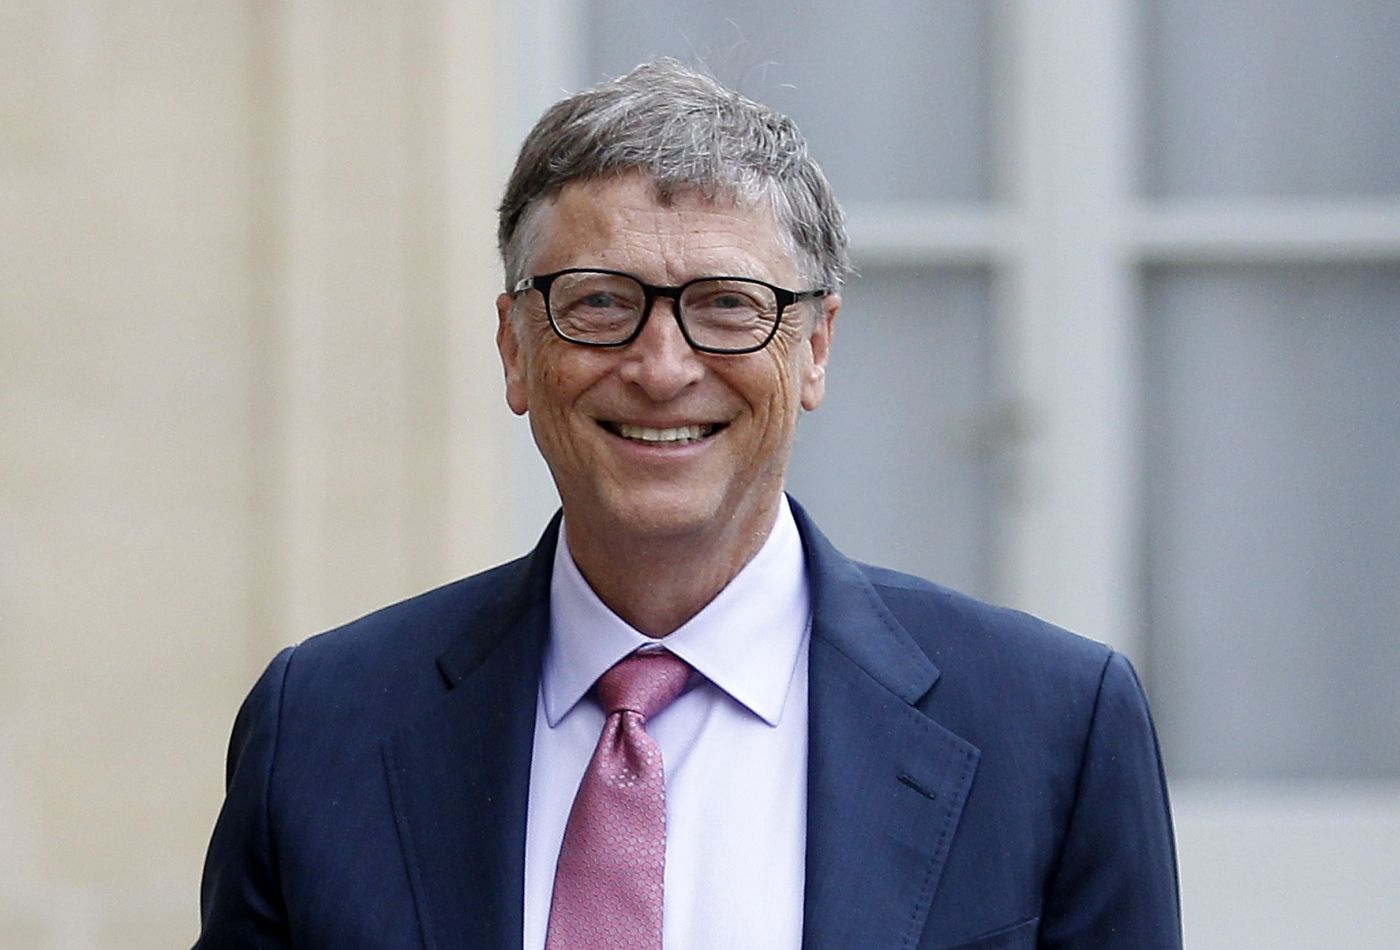 Bill gate, one of the richest man pn earth